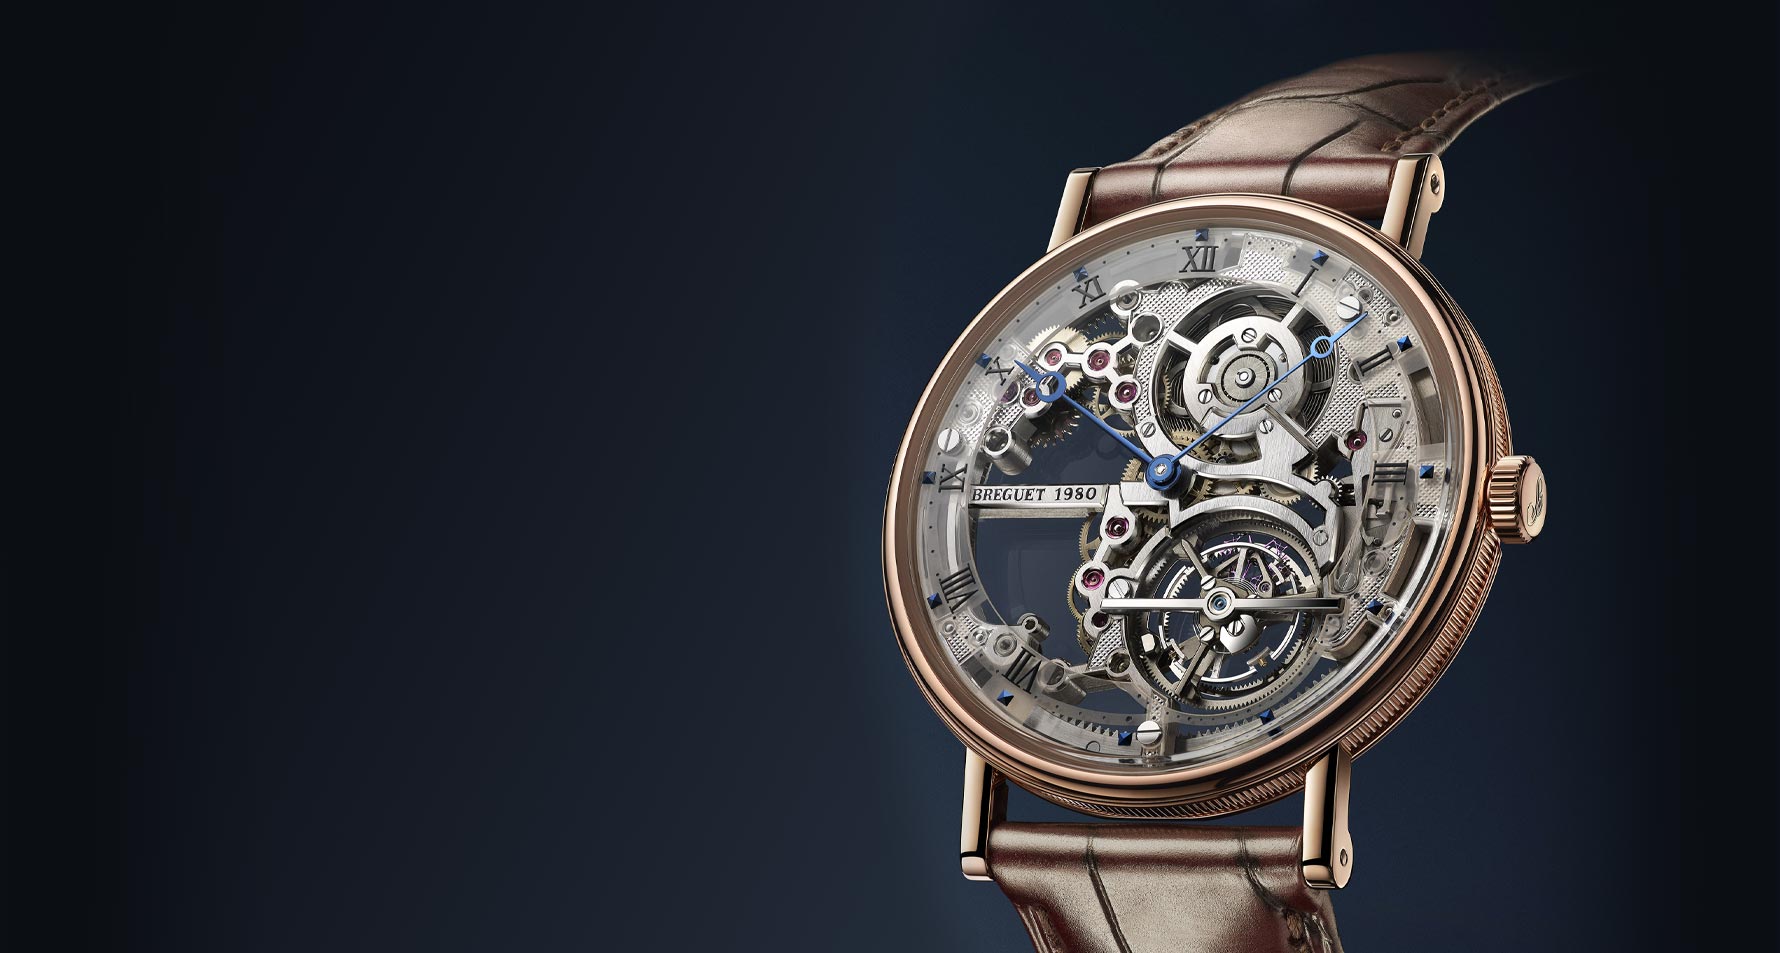 Breguet presents its new 2019 collection